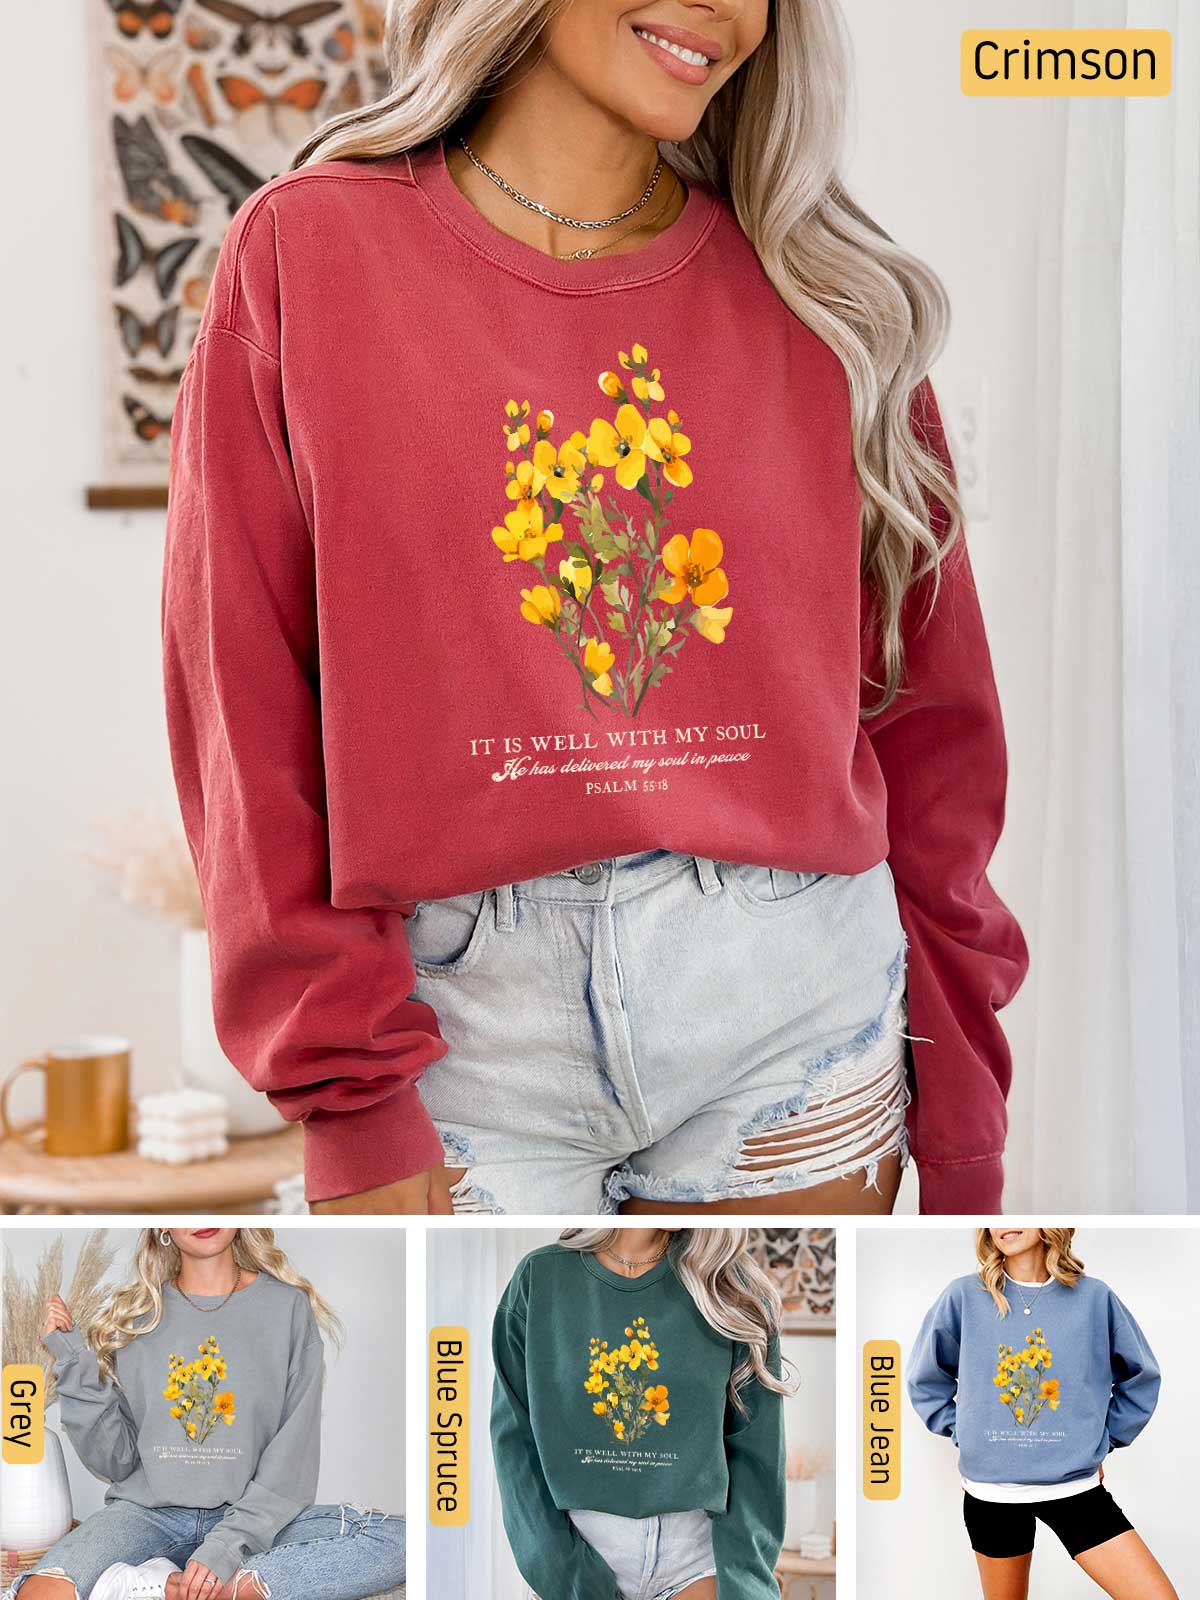 a woman wearing a red sweatshirt with yellow flowers on it